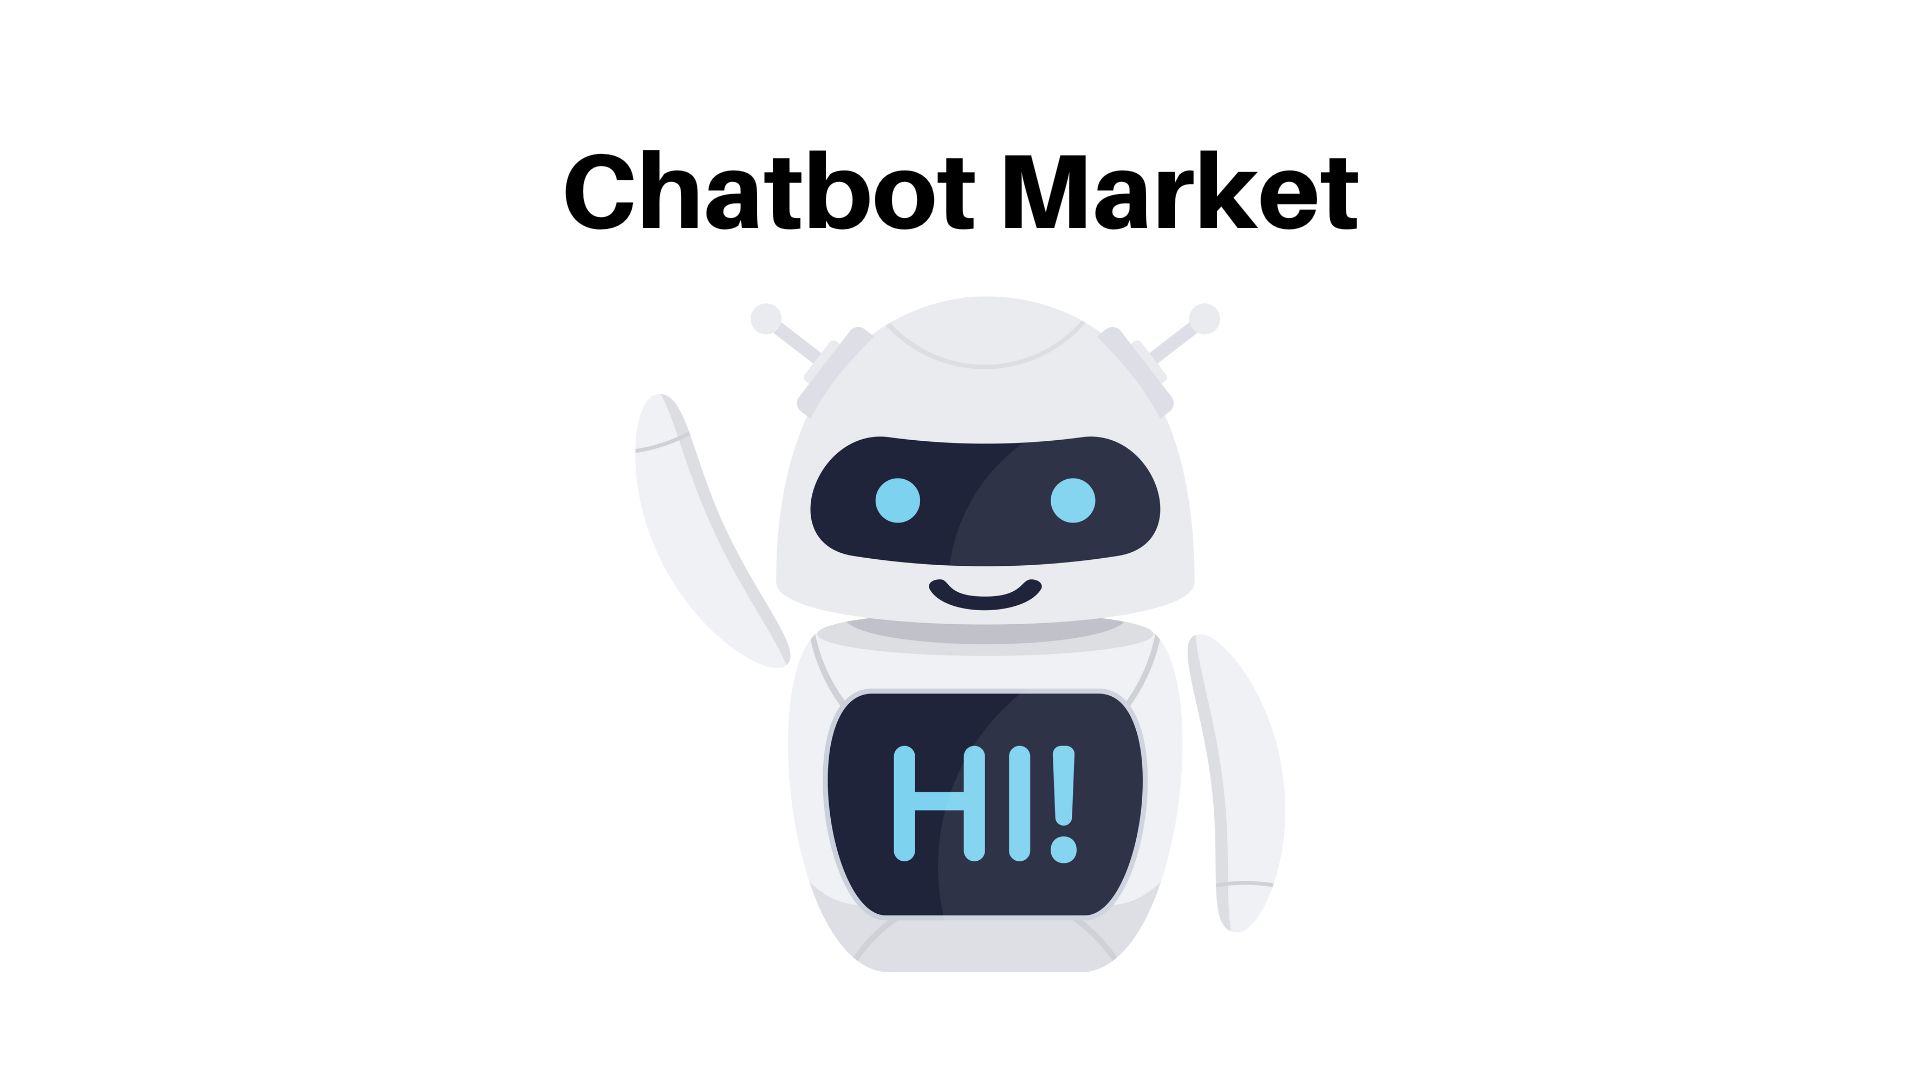 19.29% CAGR of Chatbot Market to Reach USD 4.10 billion by 2032